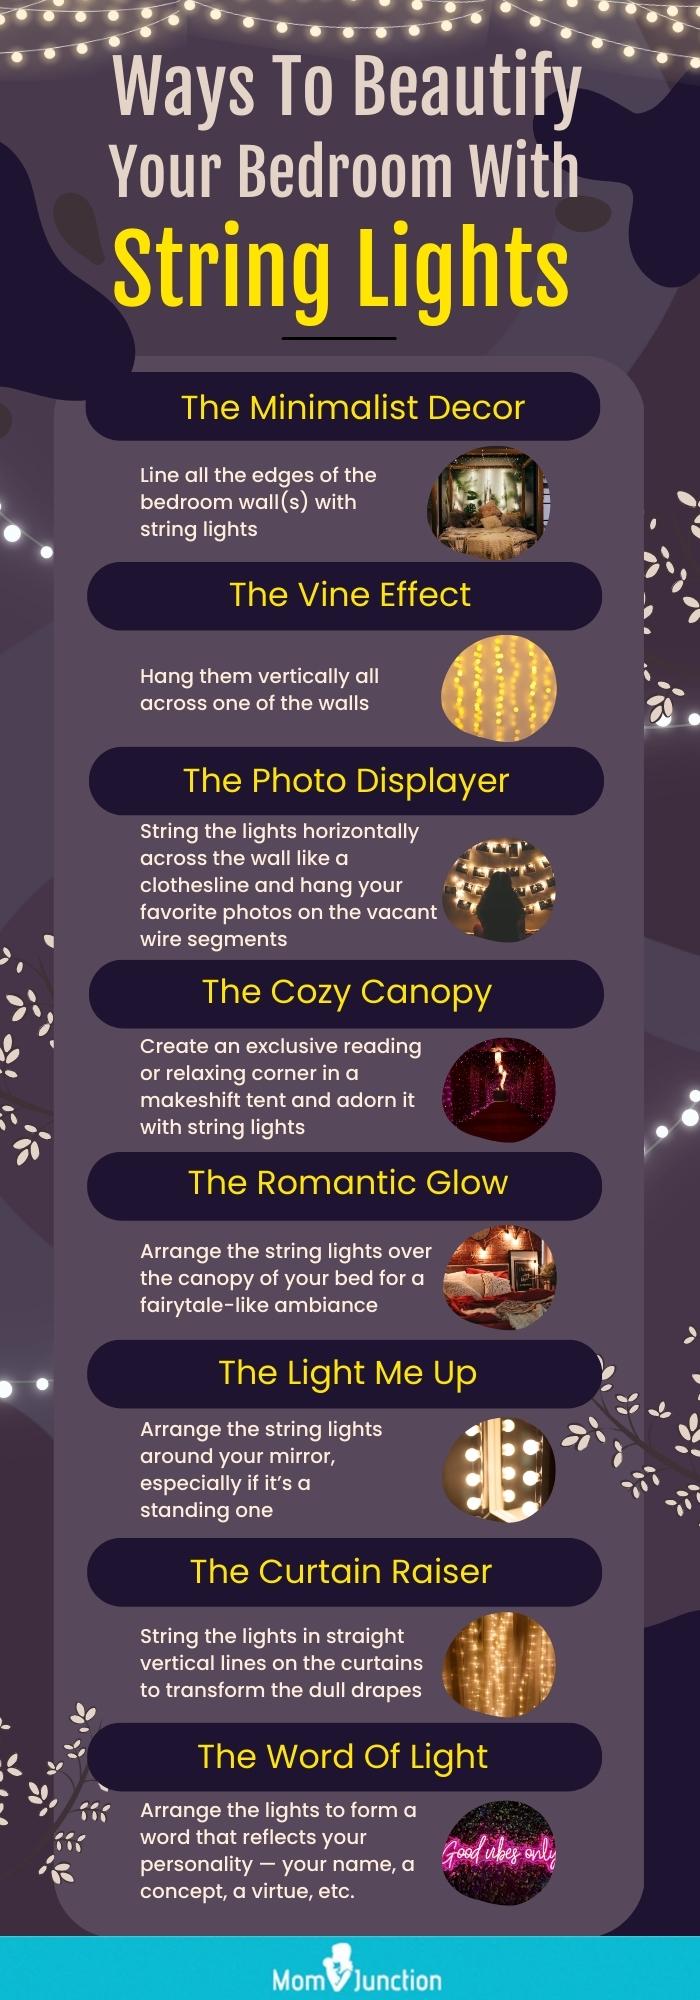 Ways To Beautify Your Bedroom With String Lights (infographic)